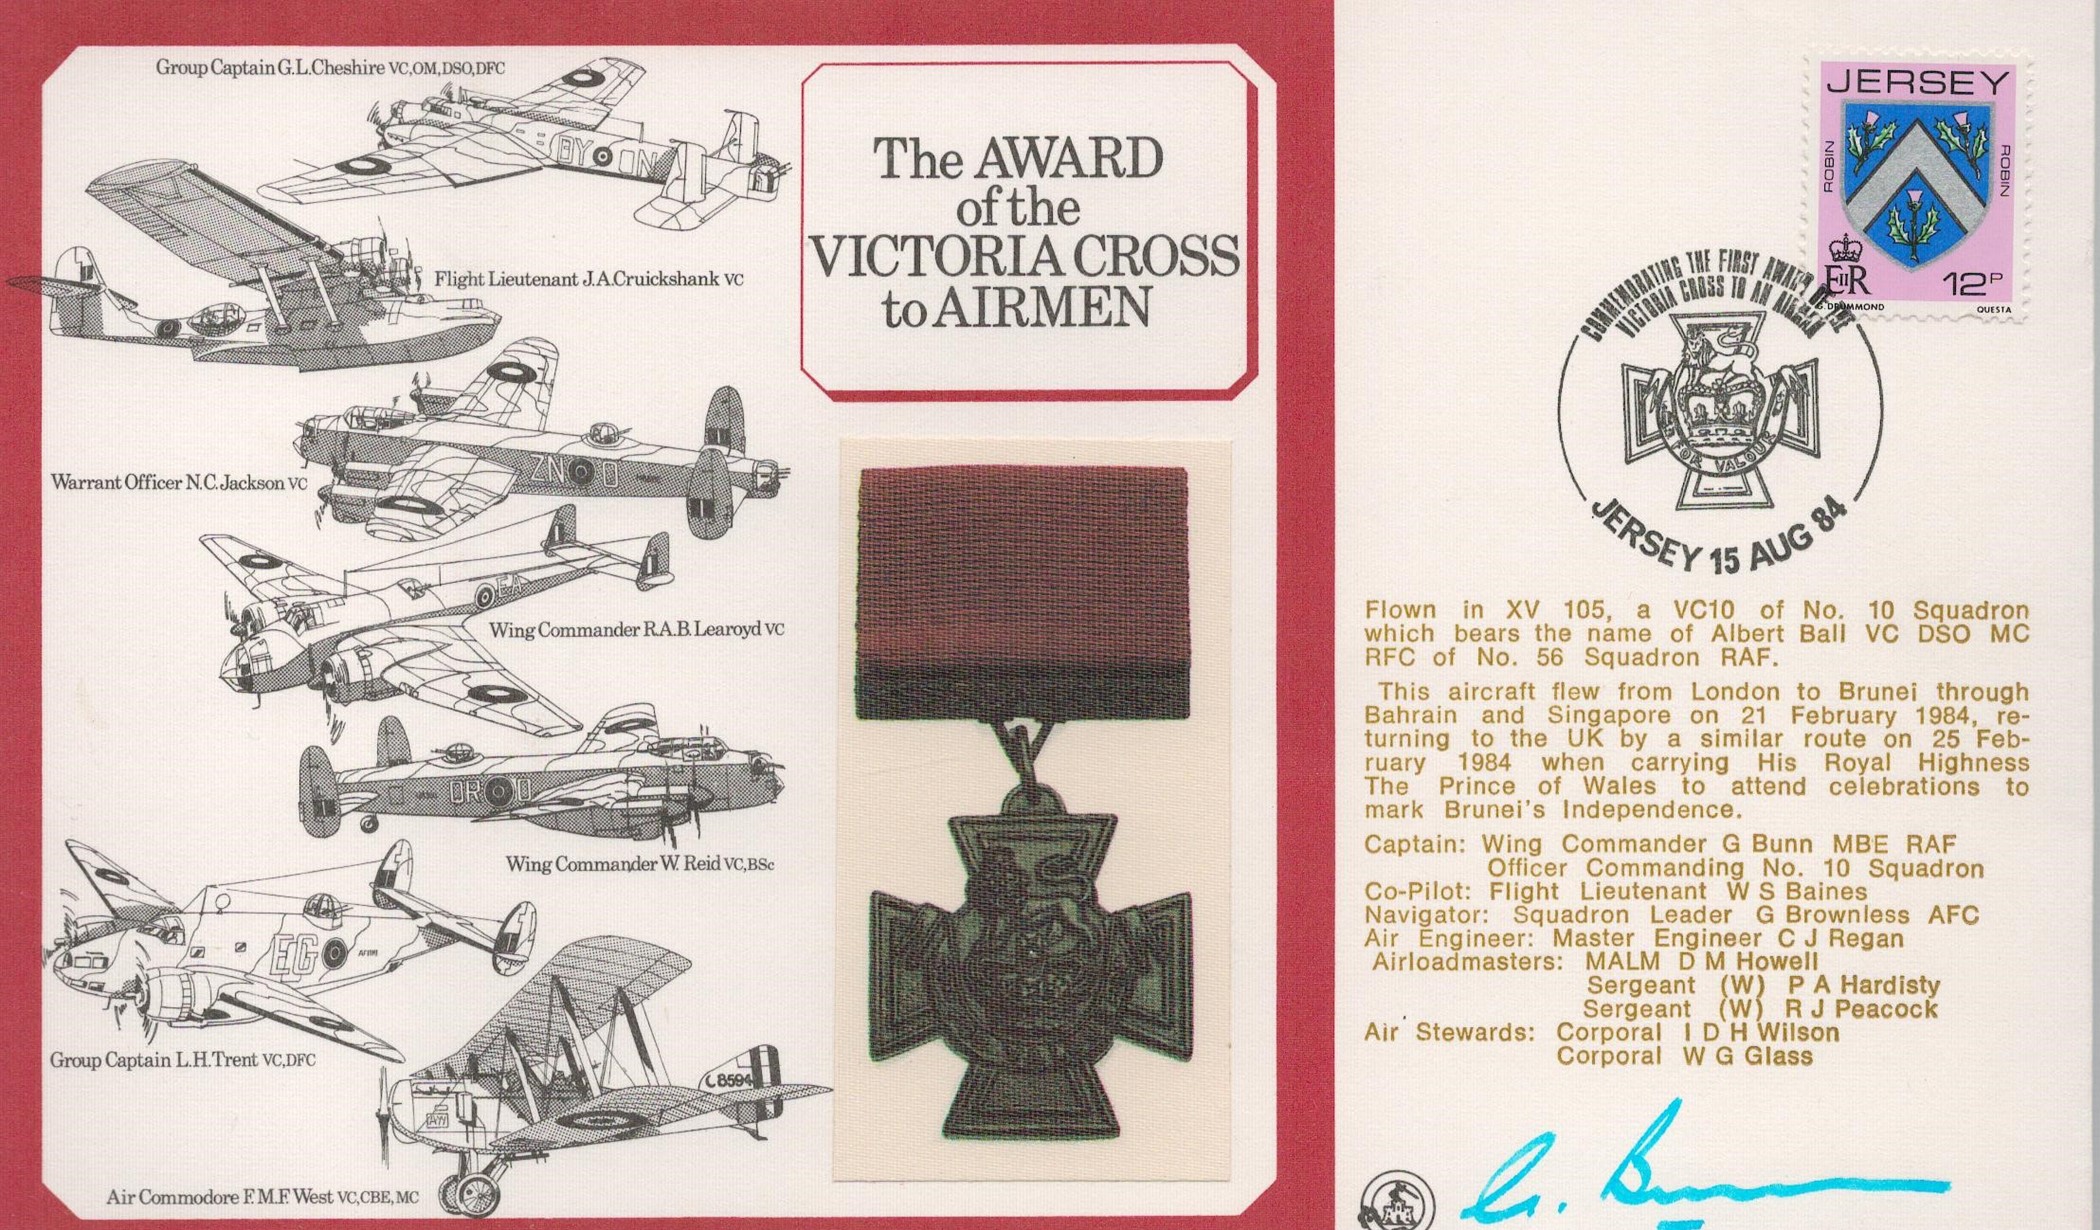 Wg Cdr G Bunn Signed The Award of the Victoria Cross to Airmen FDC With Jersey Stamp and Postmark.